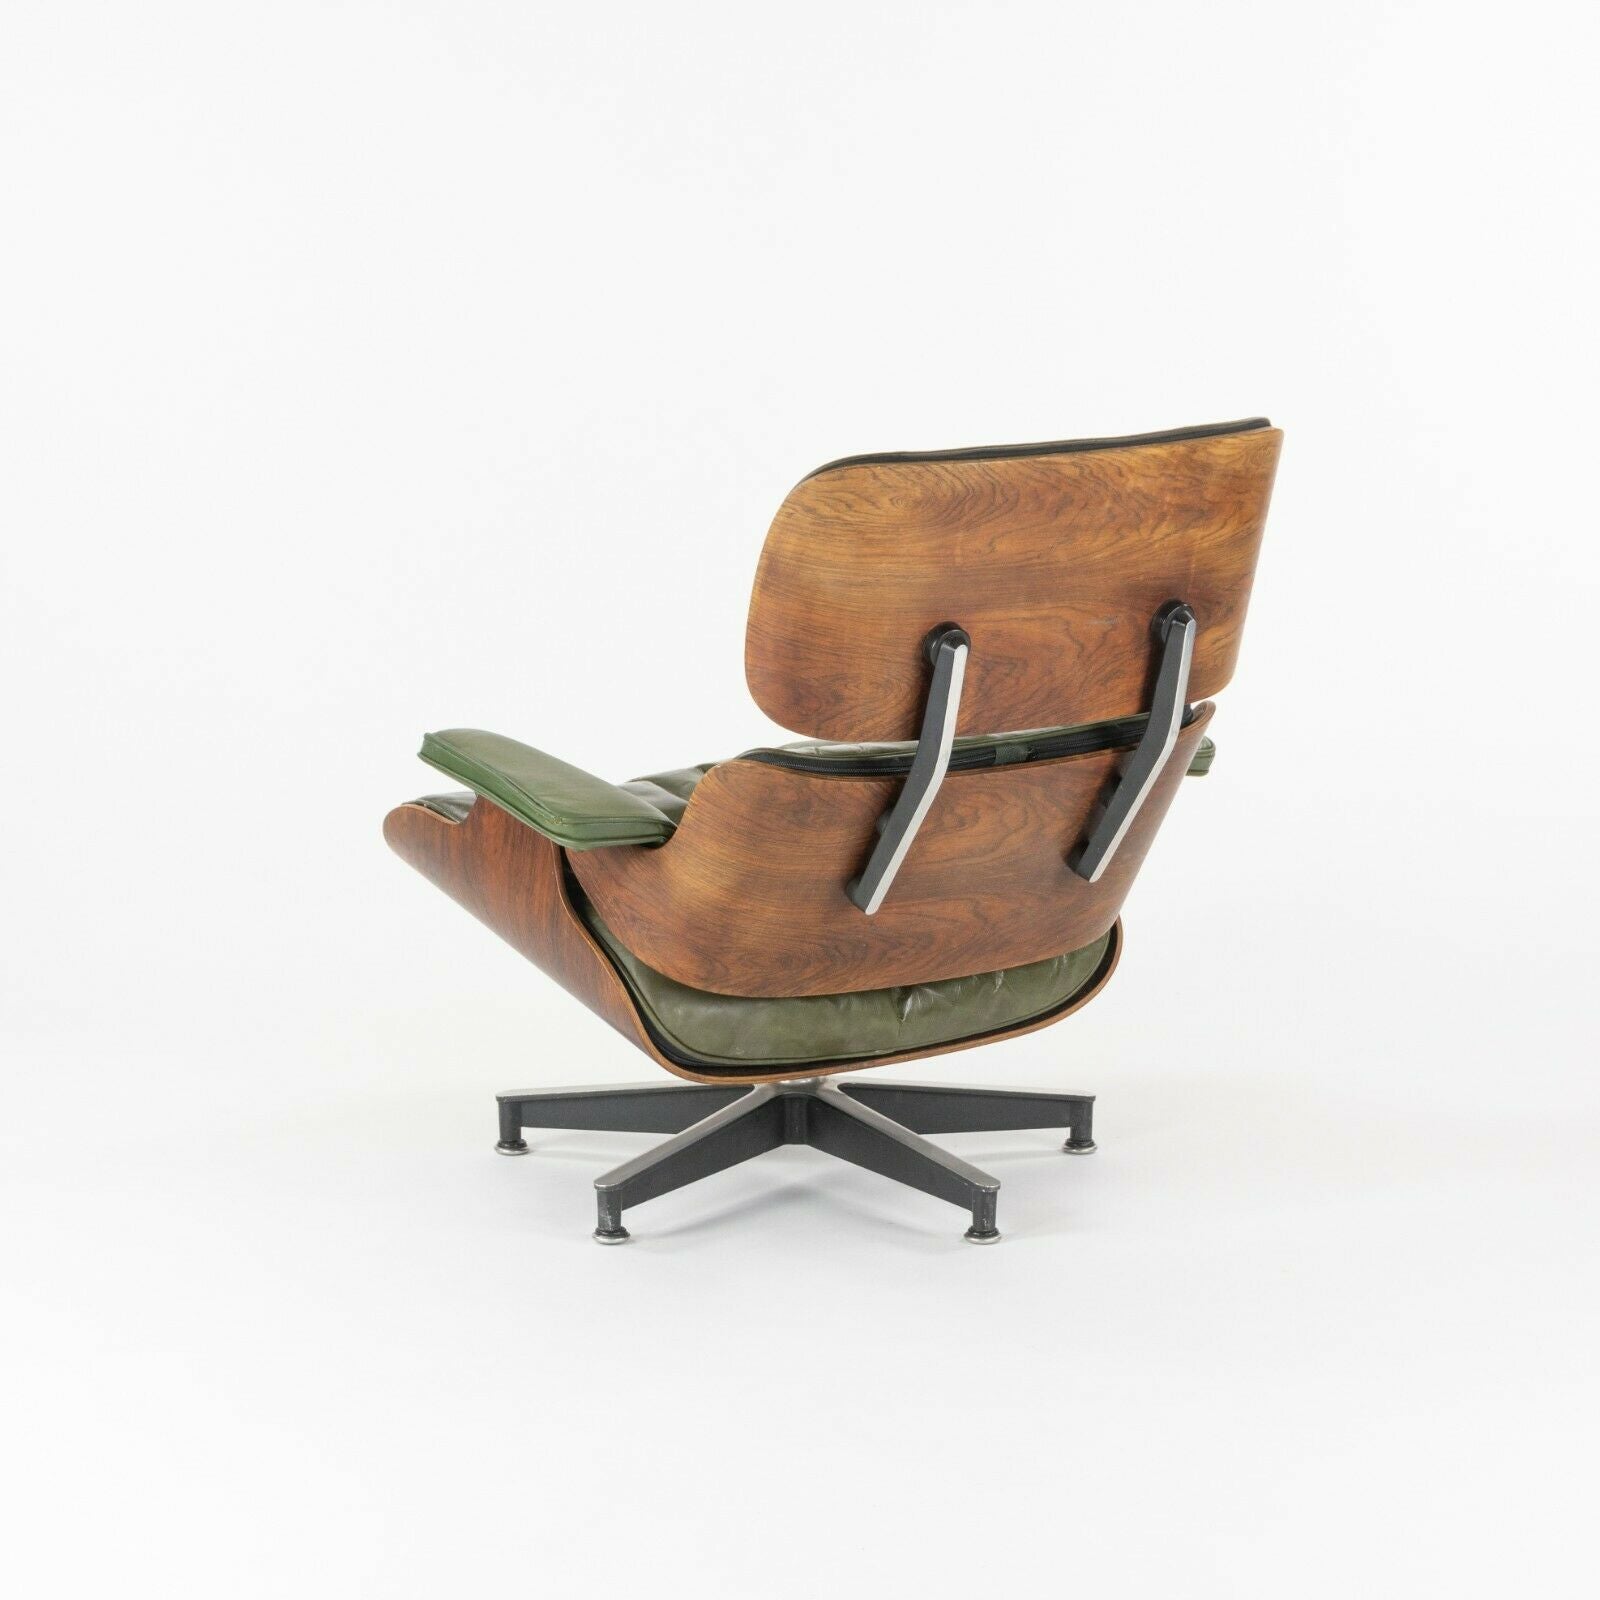 SOLD 1956 Herman Miller Eames Lounge Chair and Ottoman 670 671 in Green with Boot Glides